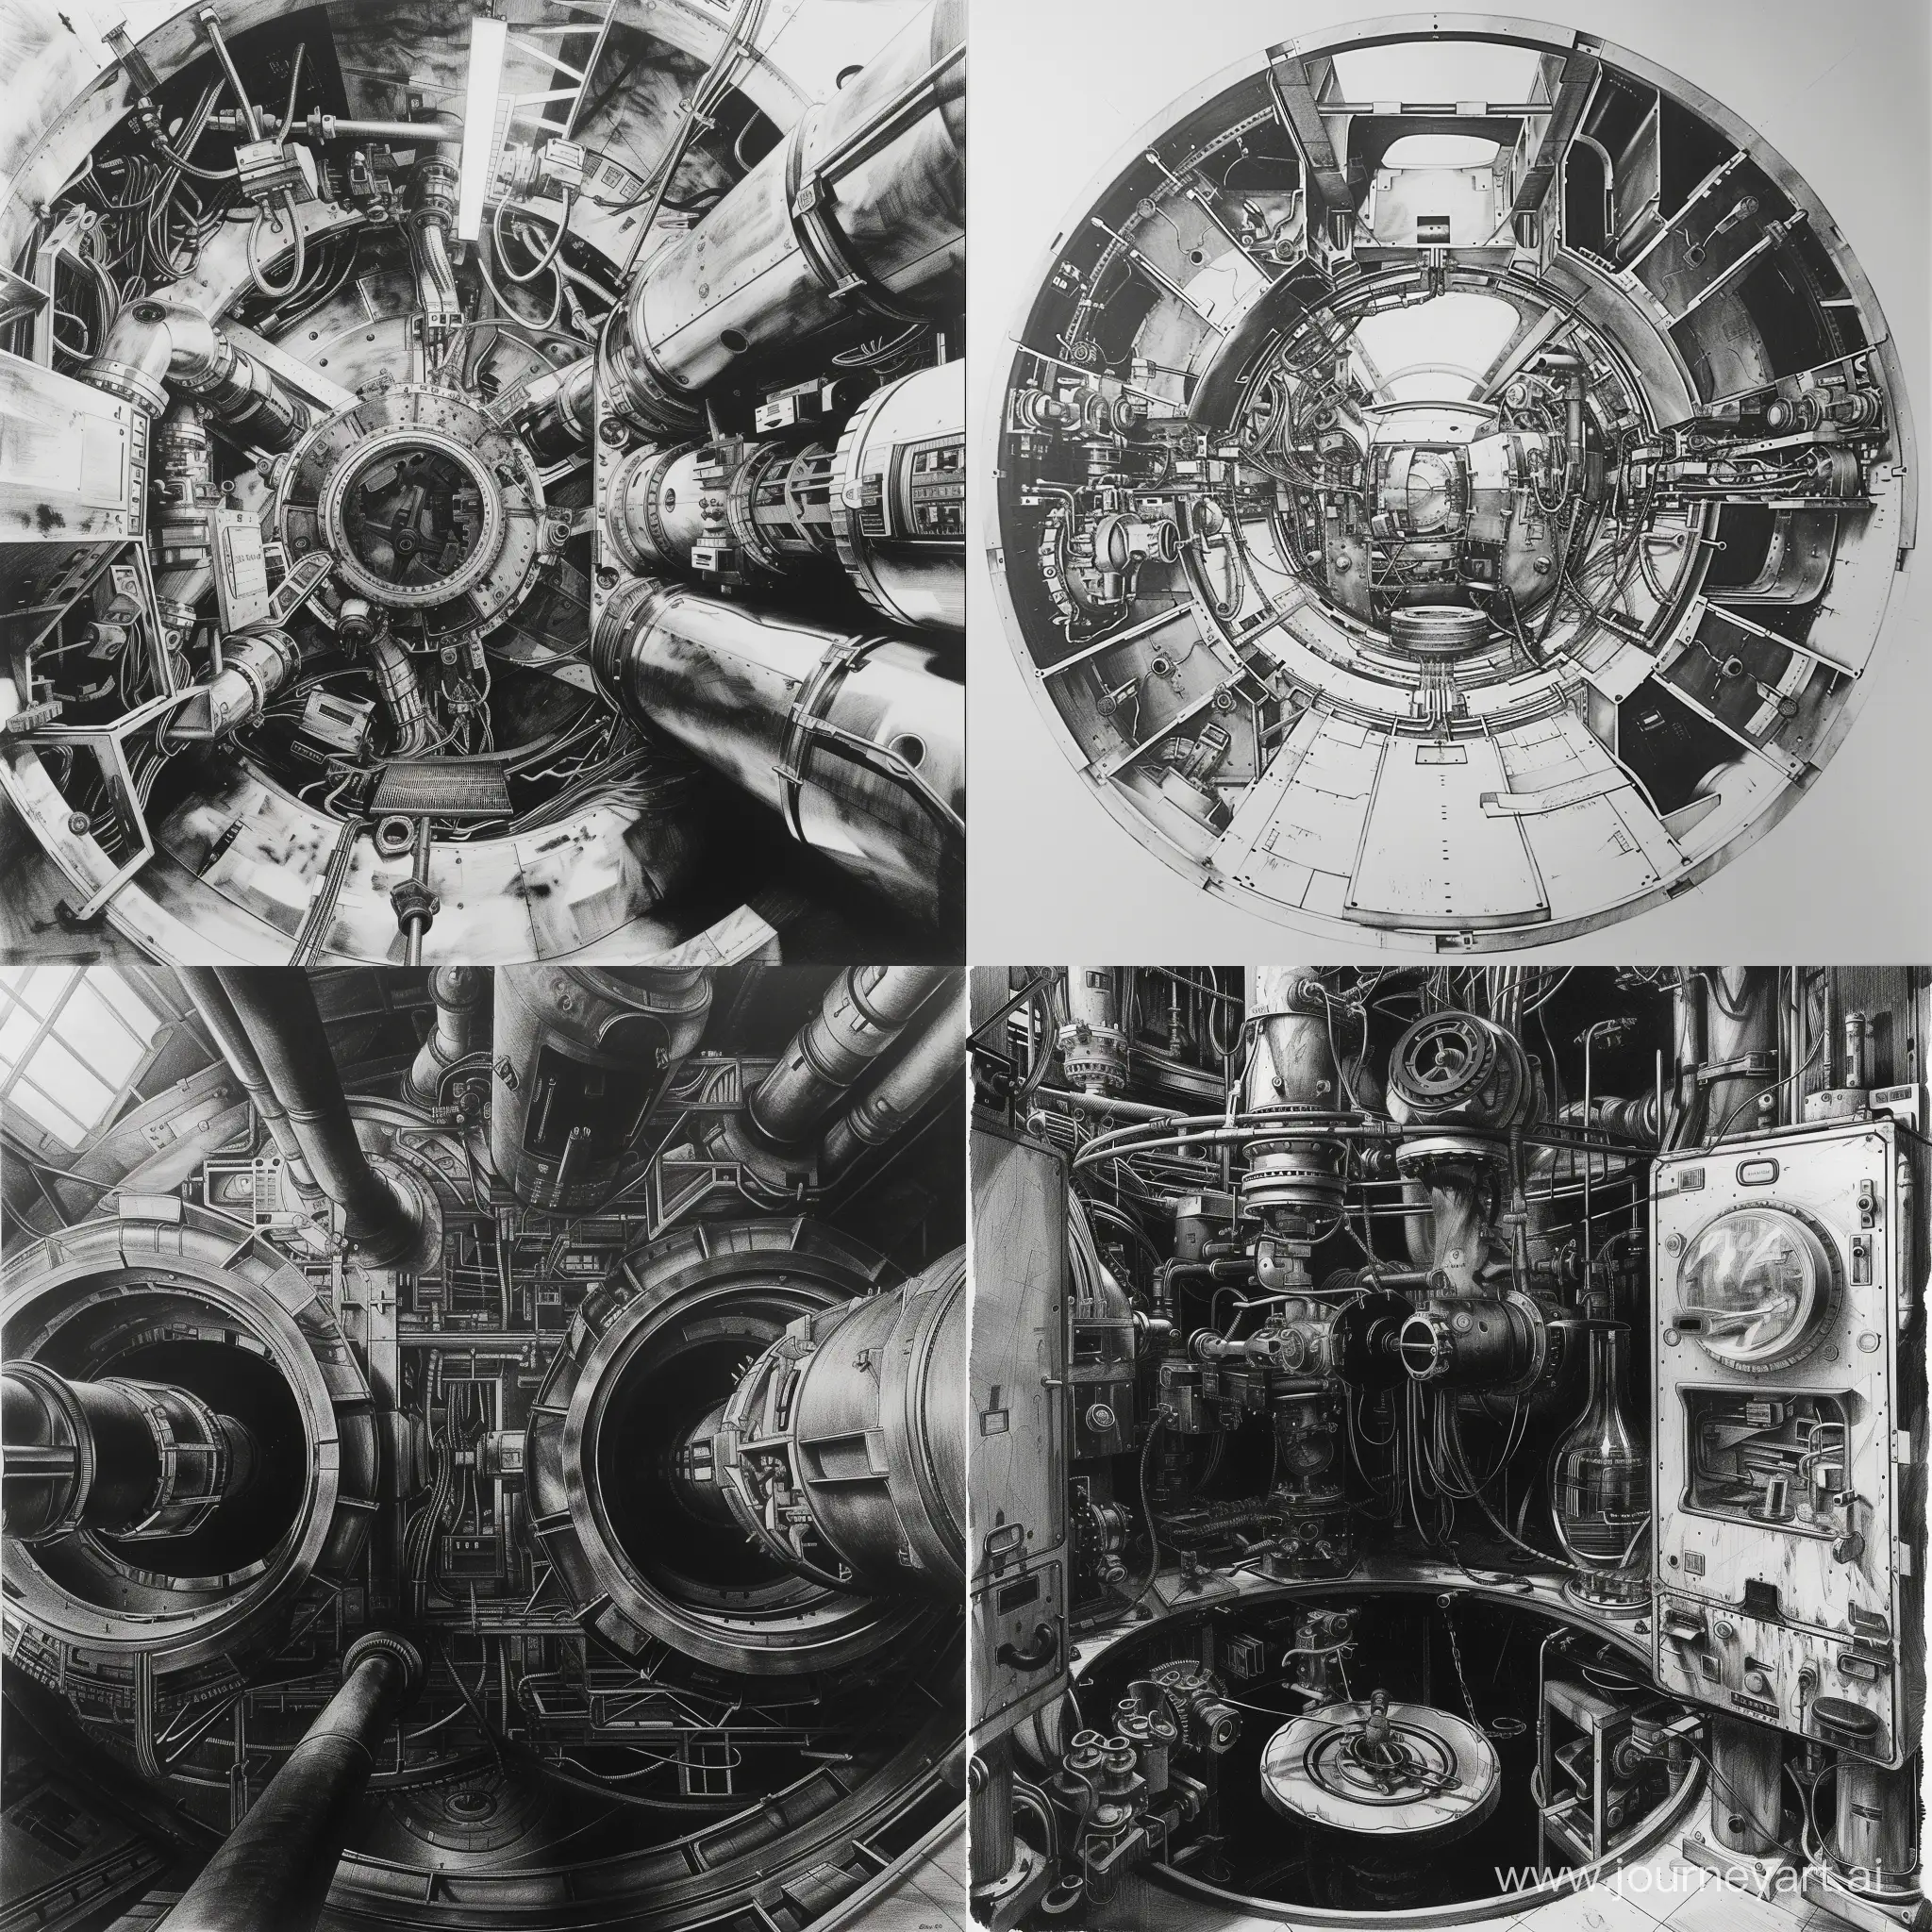 Monochrome-Drawing-of-Interior-Mechanical-Object